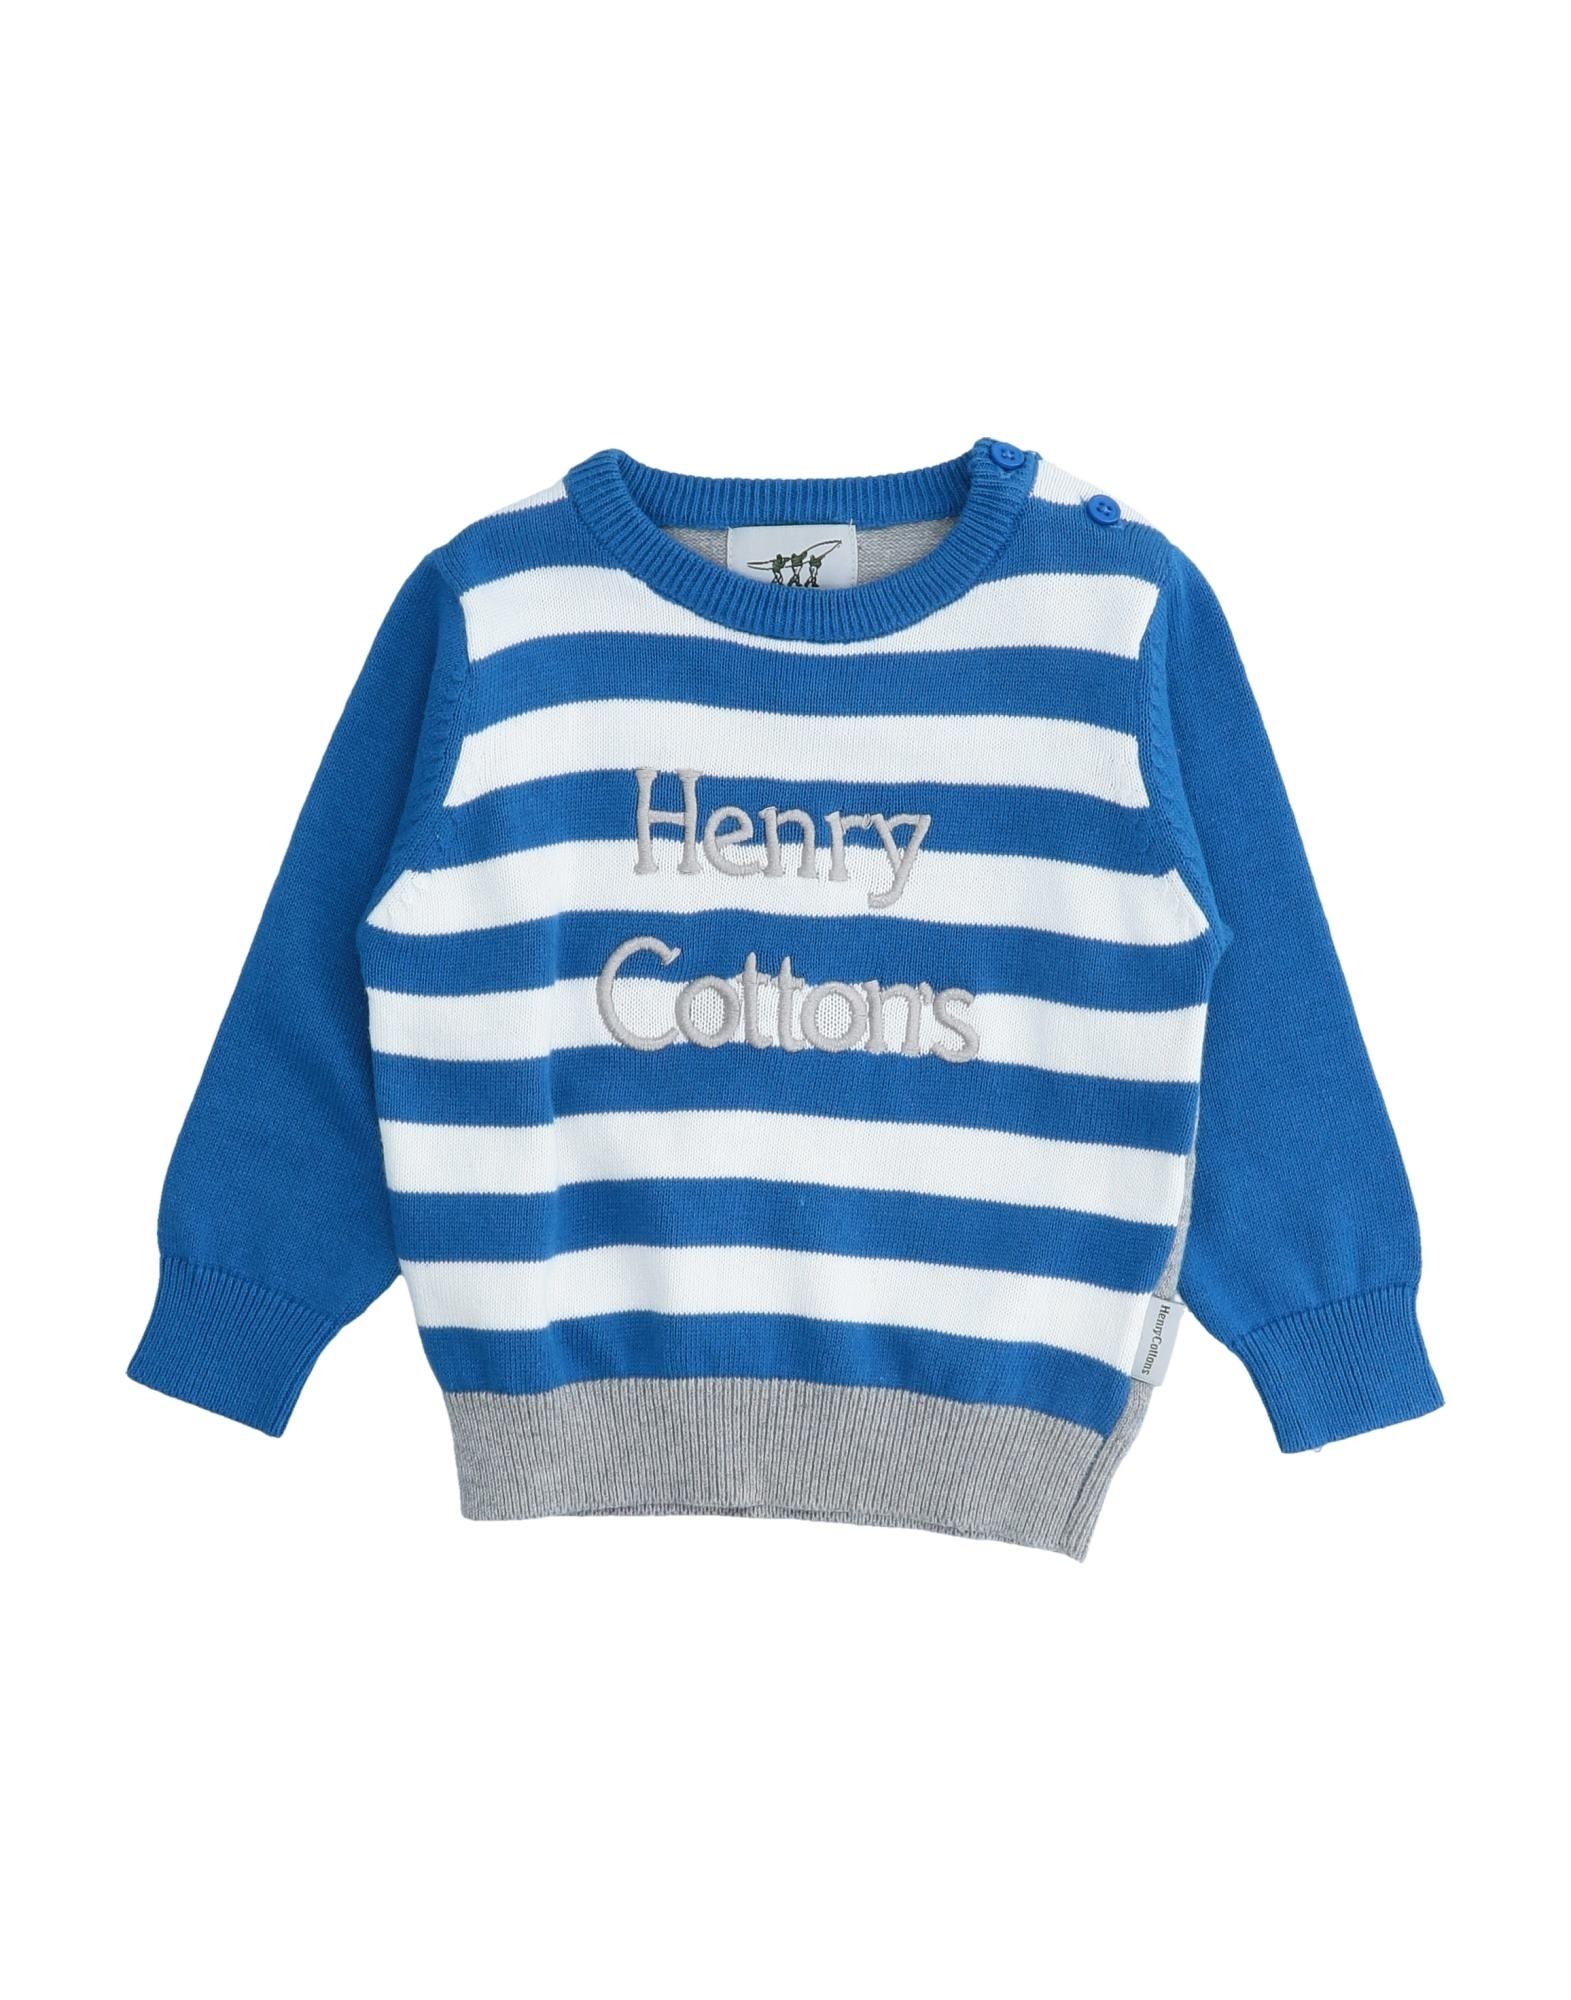 Henry Cotton's Kids' Sweaters In Bright Blue